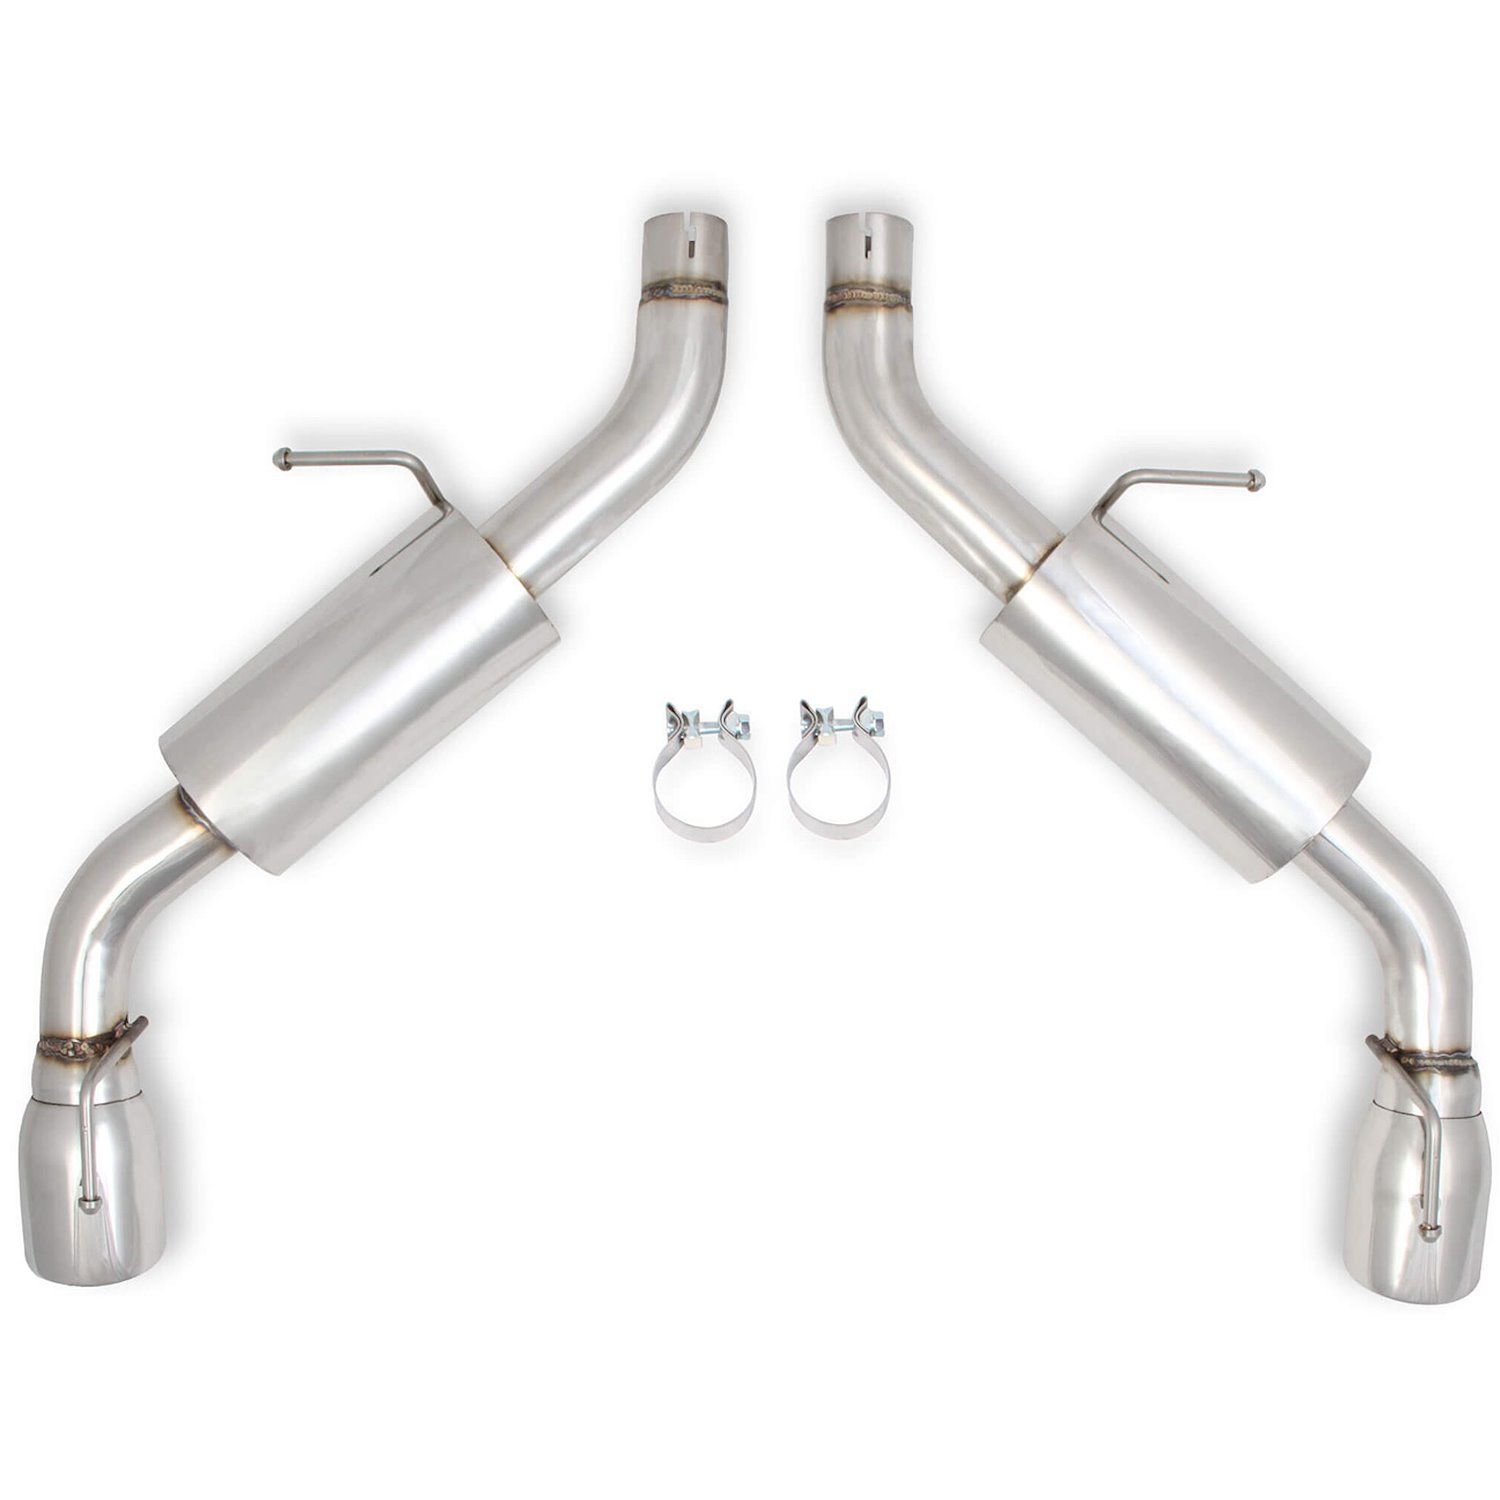 Axle-Back Exhaust System